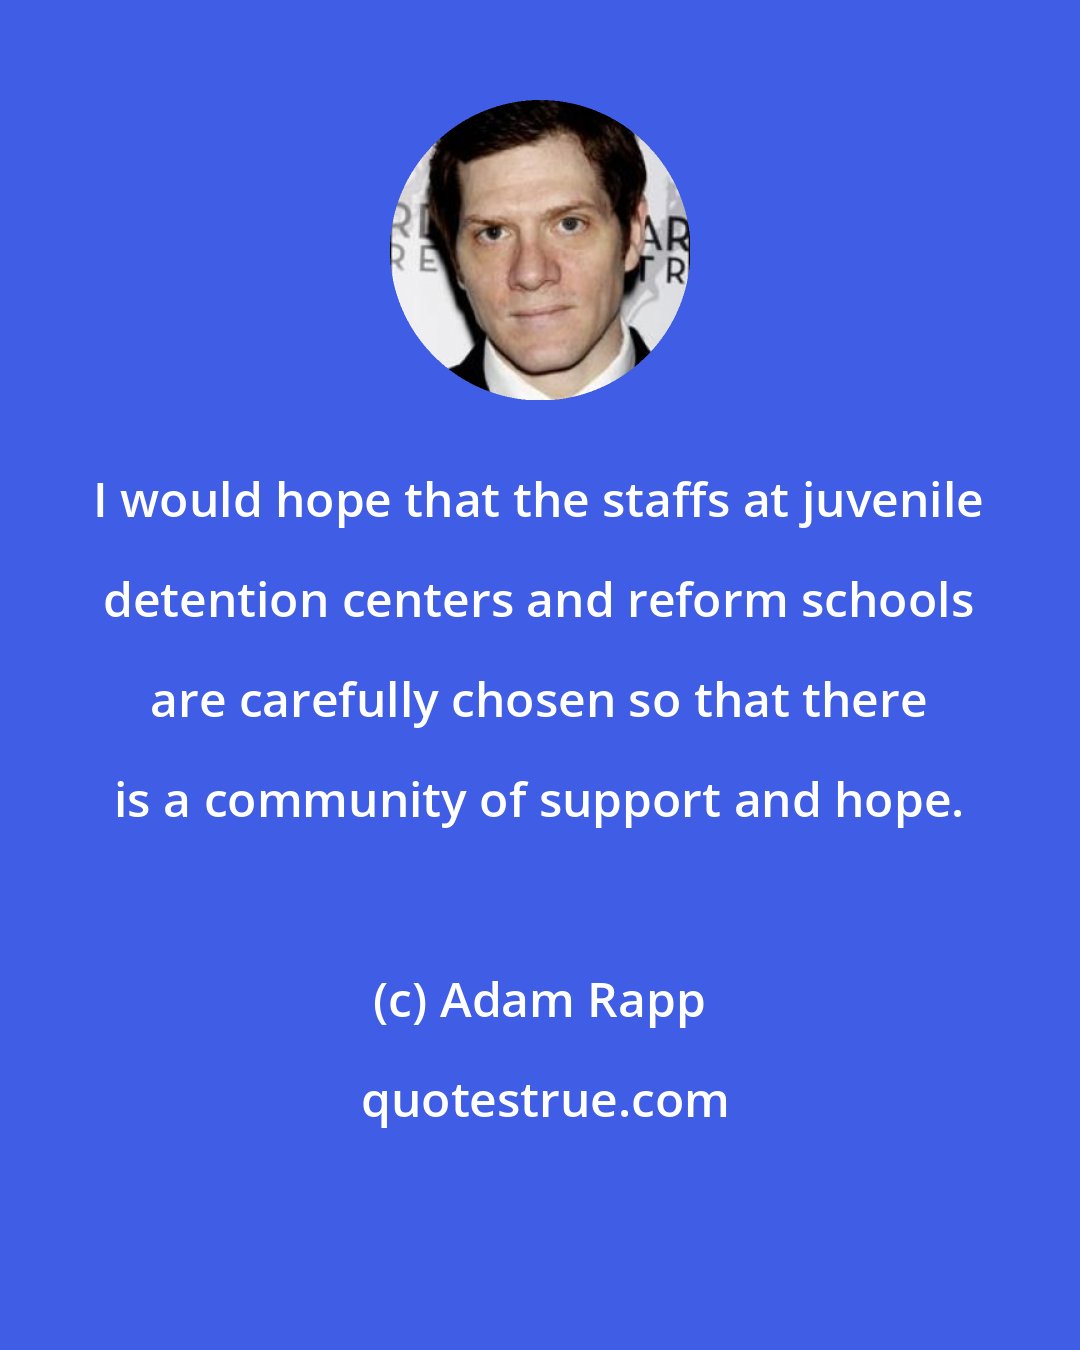 Adam Rapp: I would hope that the staffs at juvenile detention centers and reform schools are carefully chosen so that there is a community of support and hope.